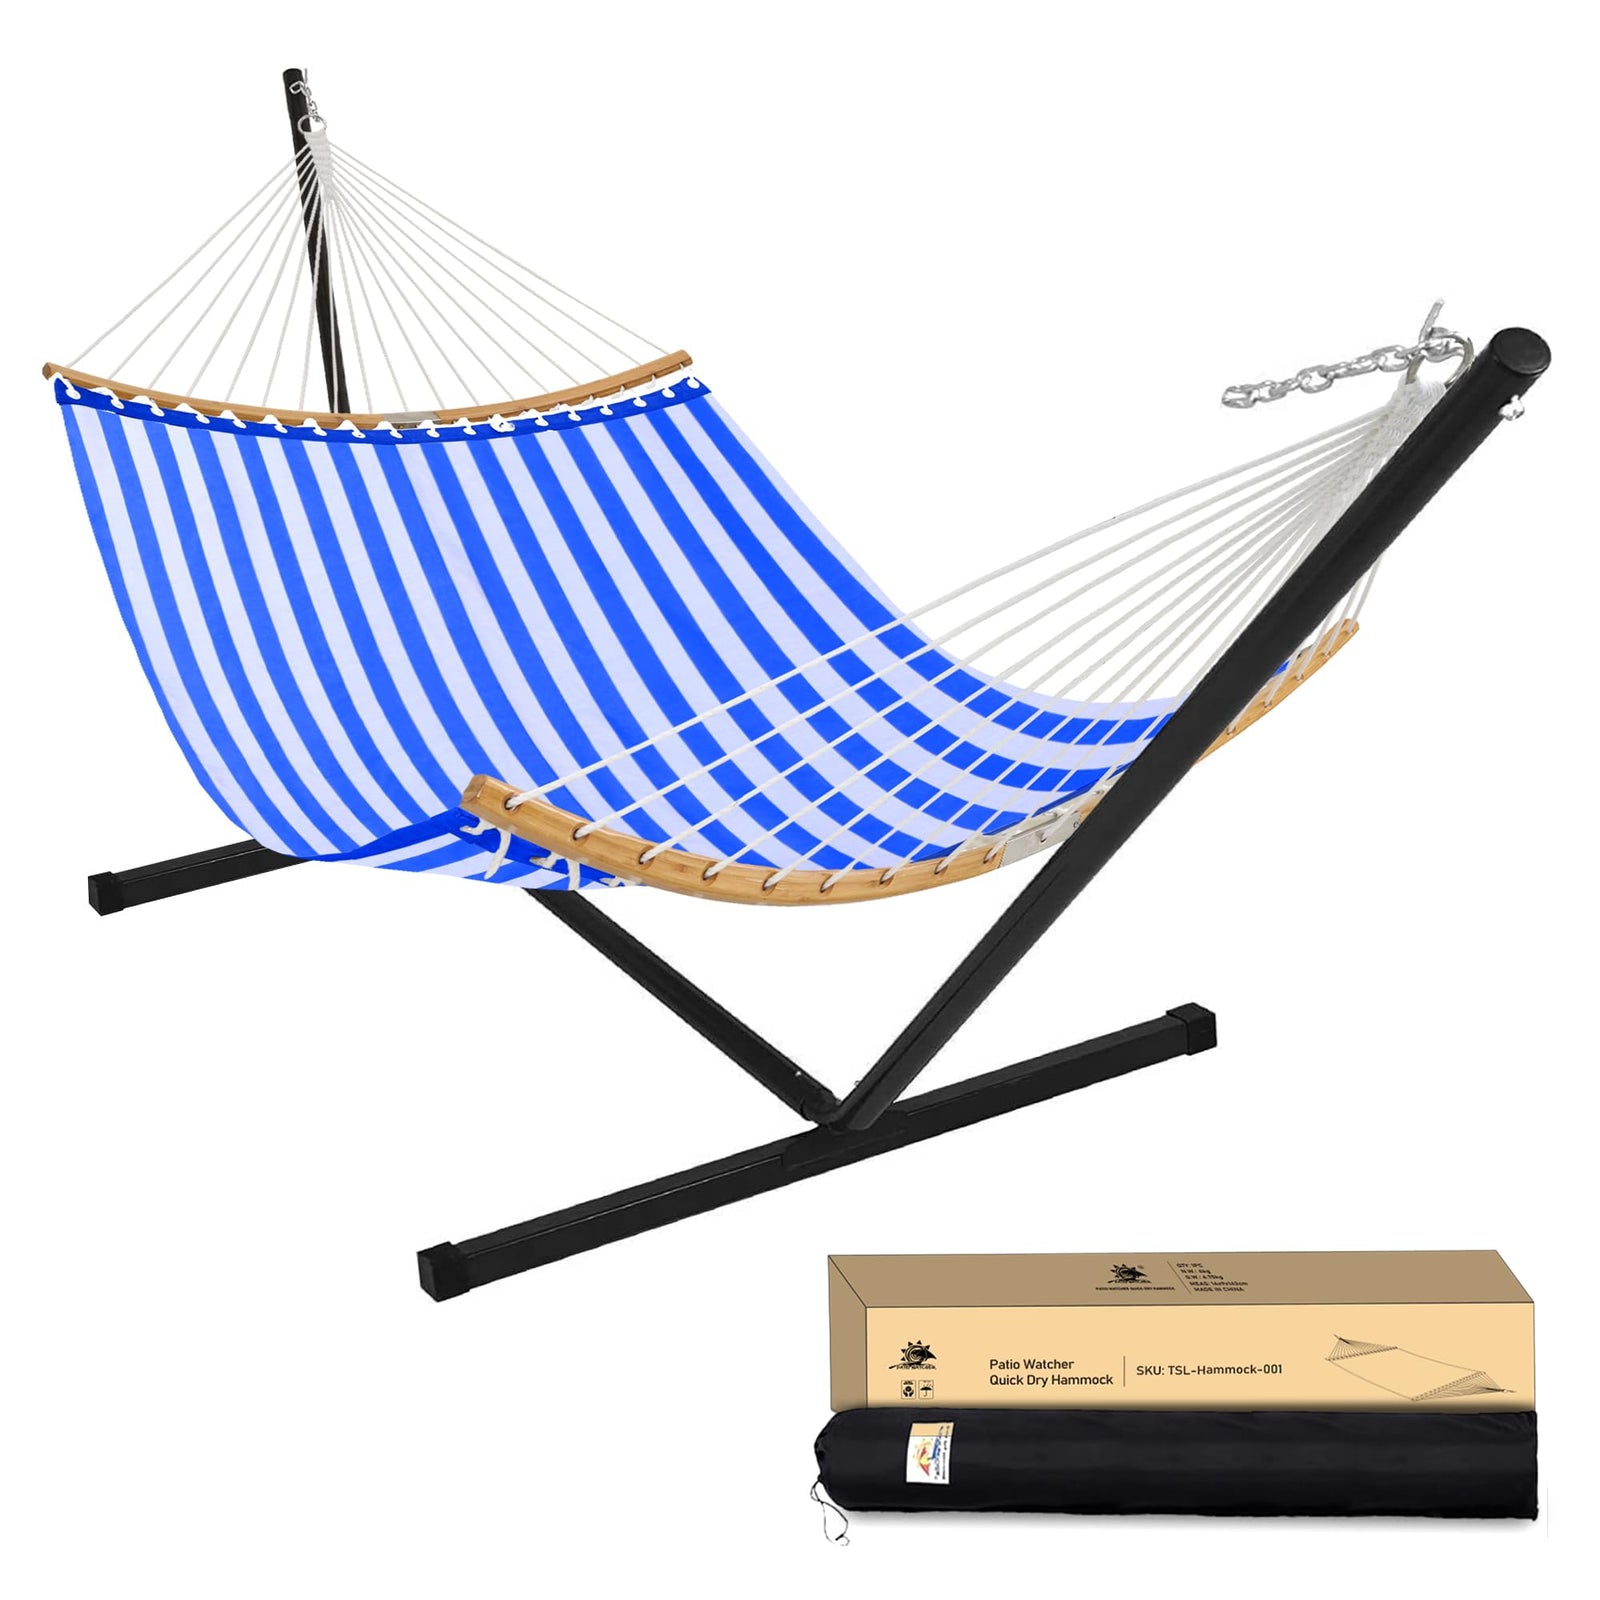 Patio Watcher 12 FT Double Quick Dry Hammock with Curved Bamboo Spreader Bar, Outdoor Patio Two Person Hammock with Portable Steel Stand,450 lbs Capacity, Blue White